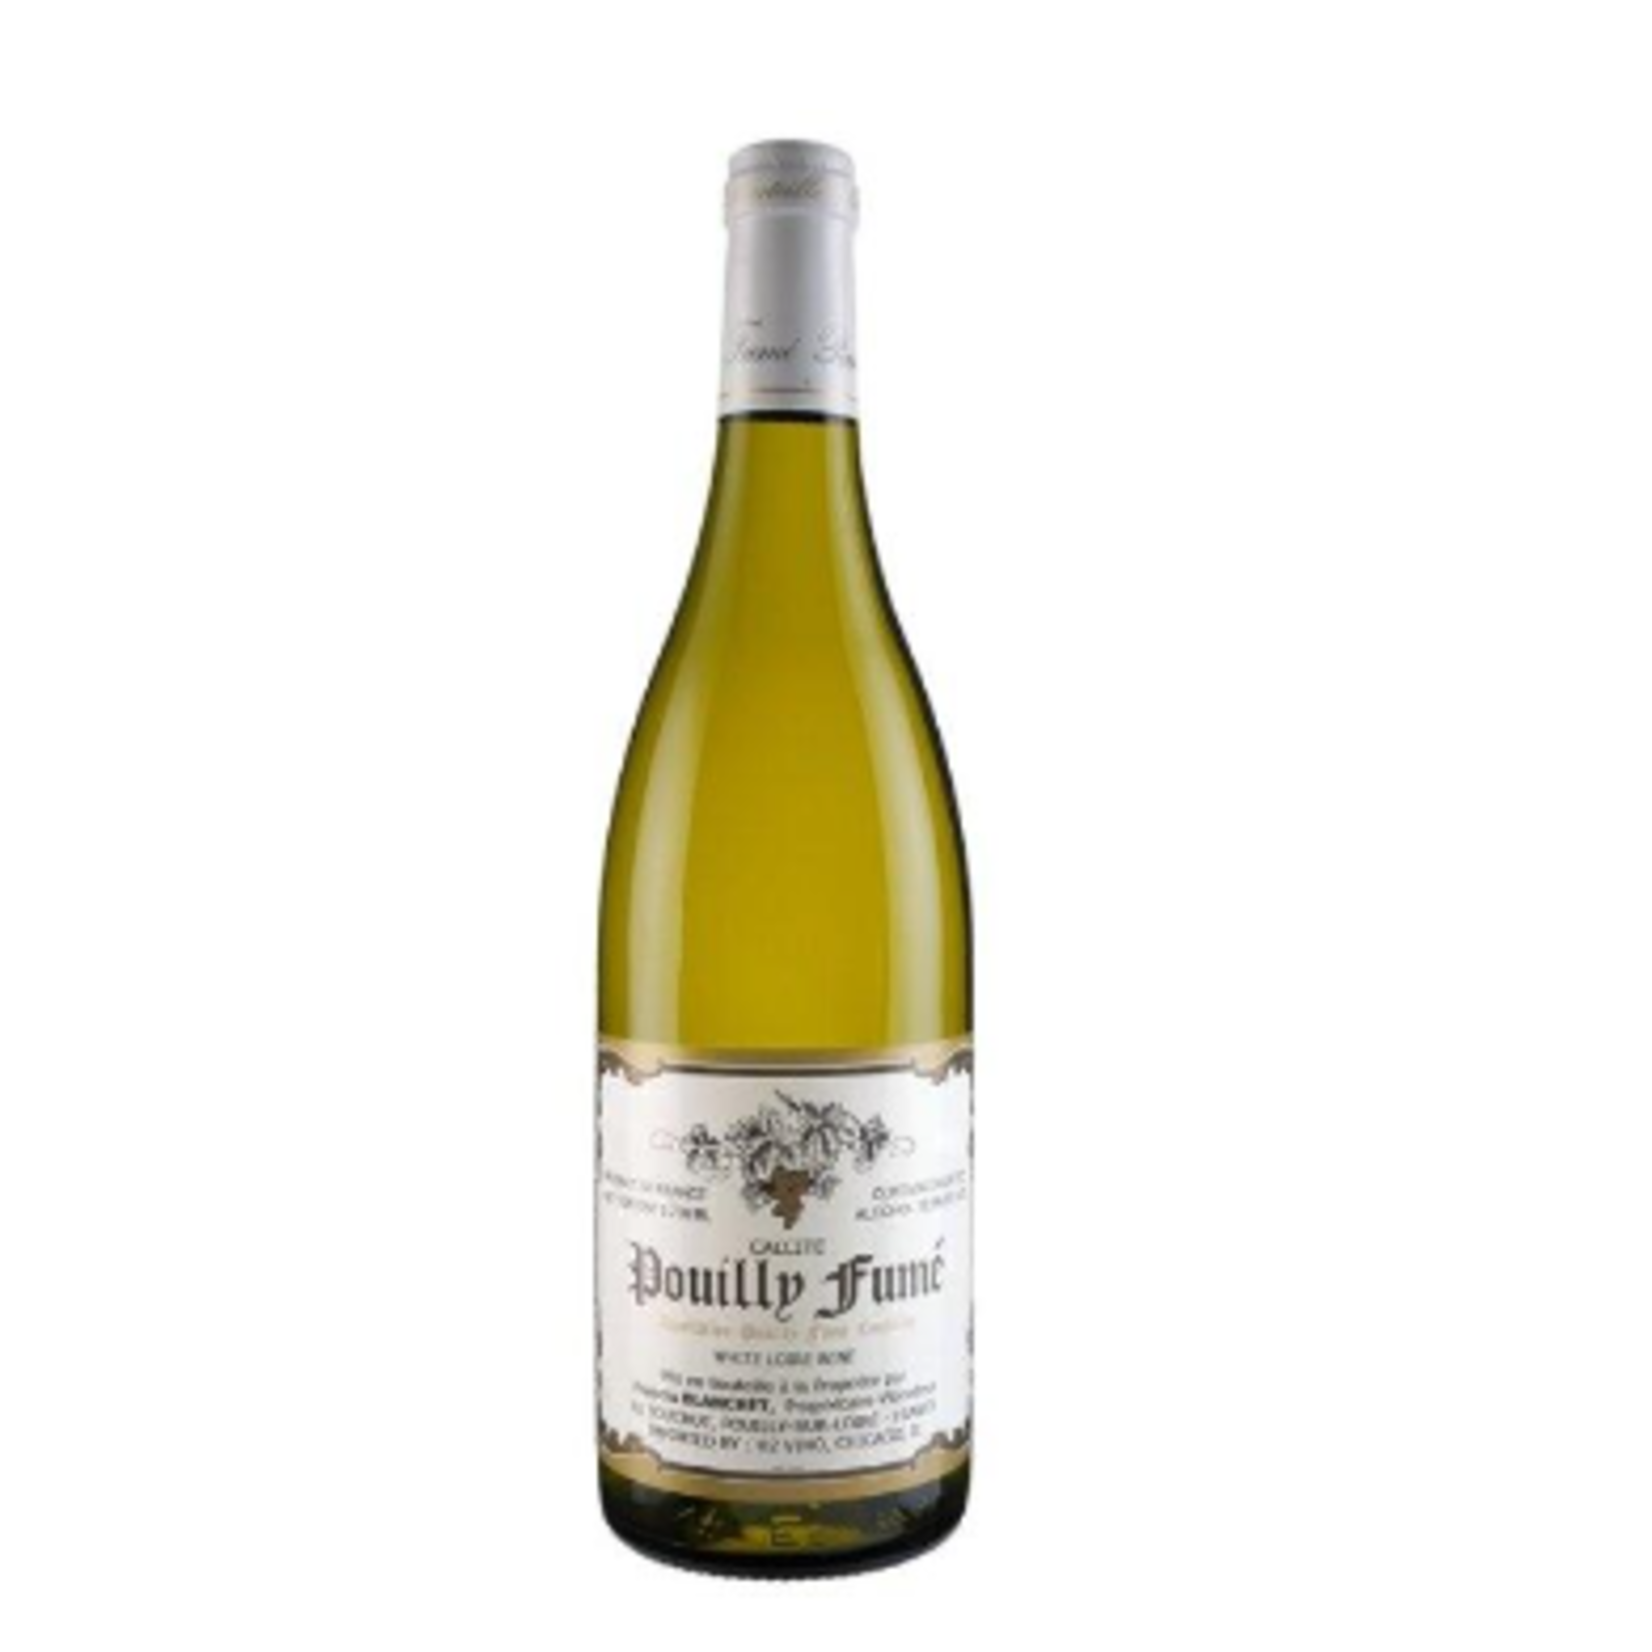 Francis Blanchet Pouilly Fume Cuvee Silice Domaine Francis Blanchet Loire, France